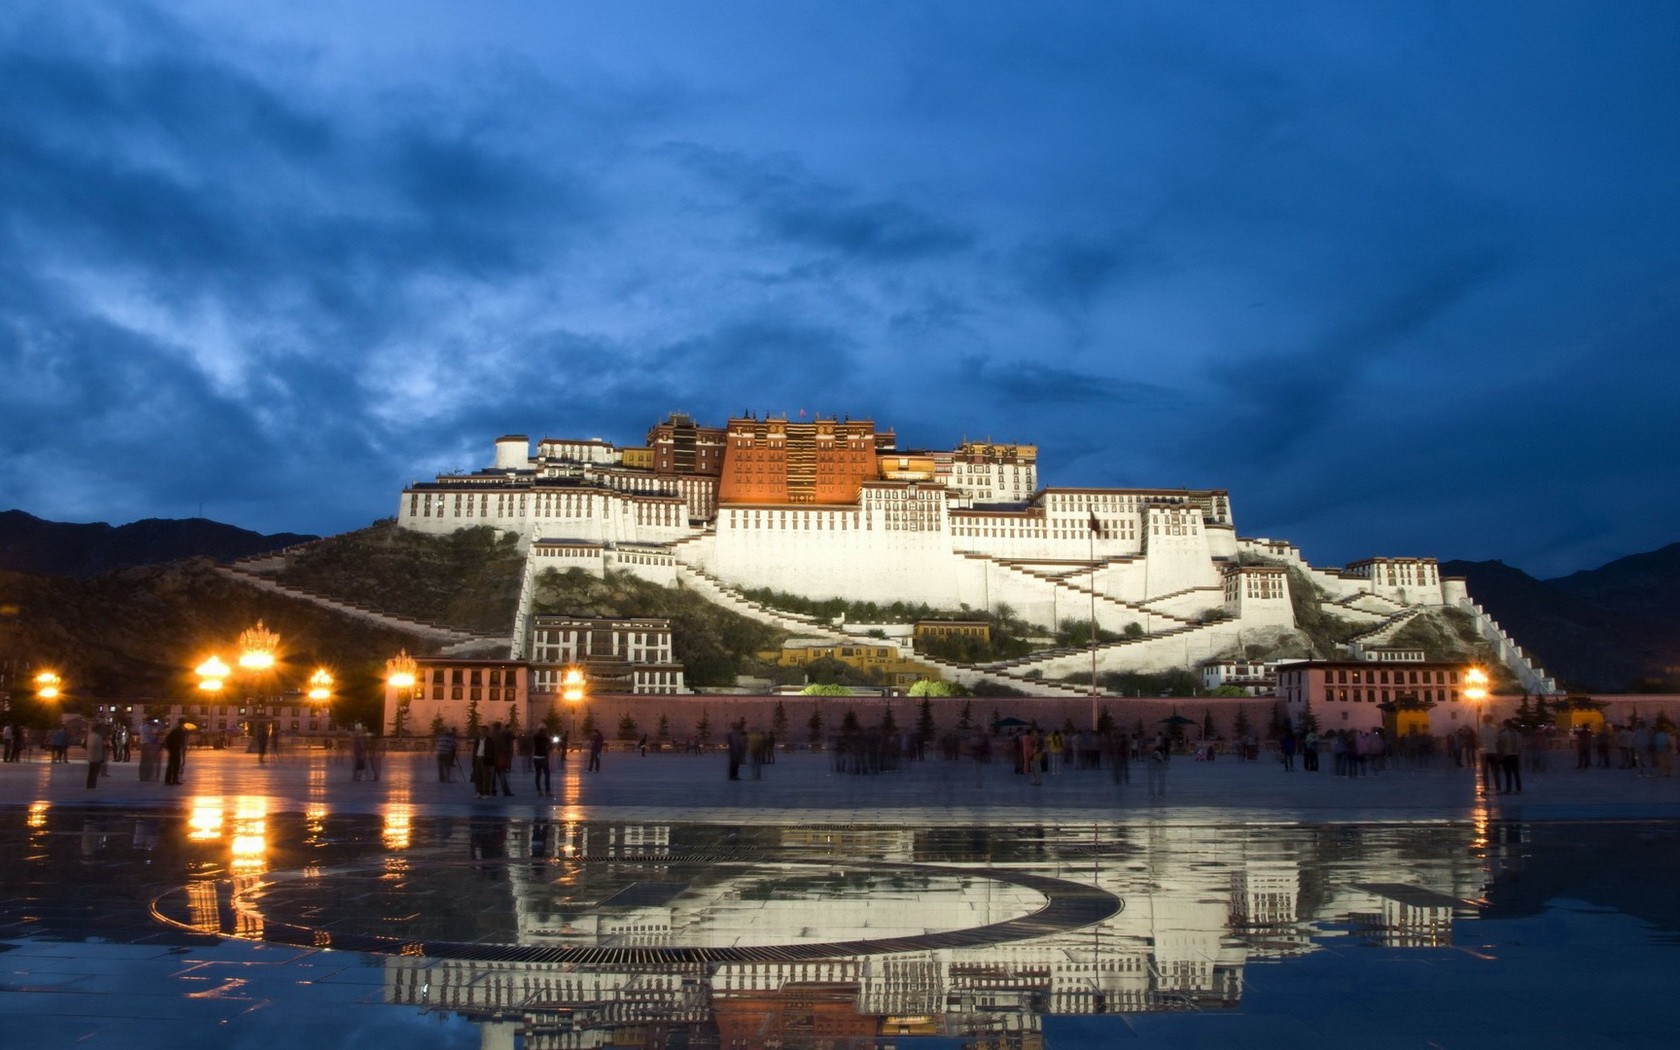 General 1680x1050 Buddhism architecture Tibet Potala Palace palace evening hills stairs clouds lights rocks town square reflection water Tourism mountains Lhasa